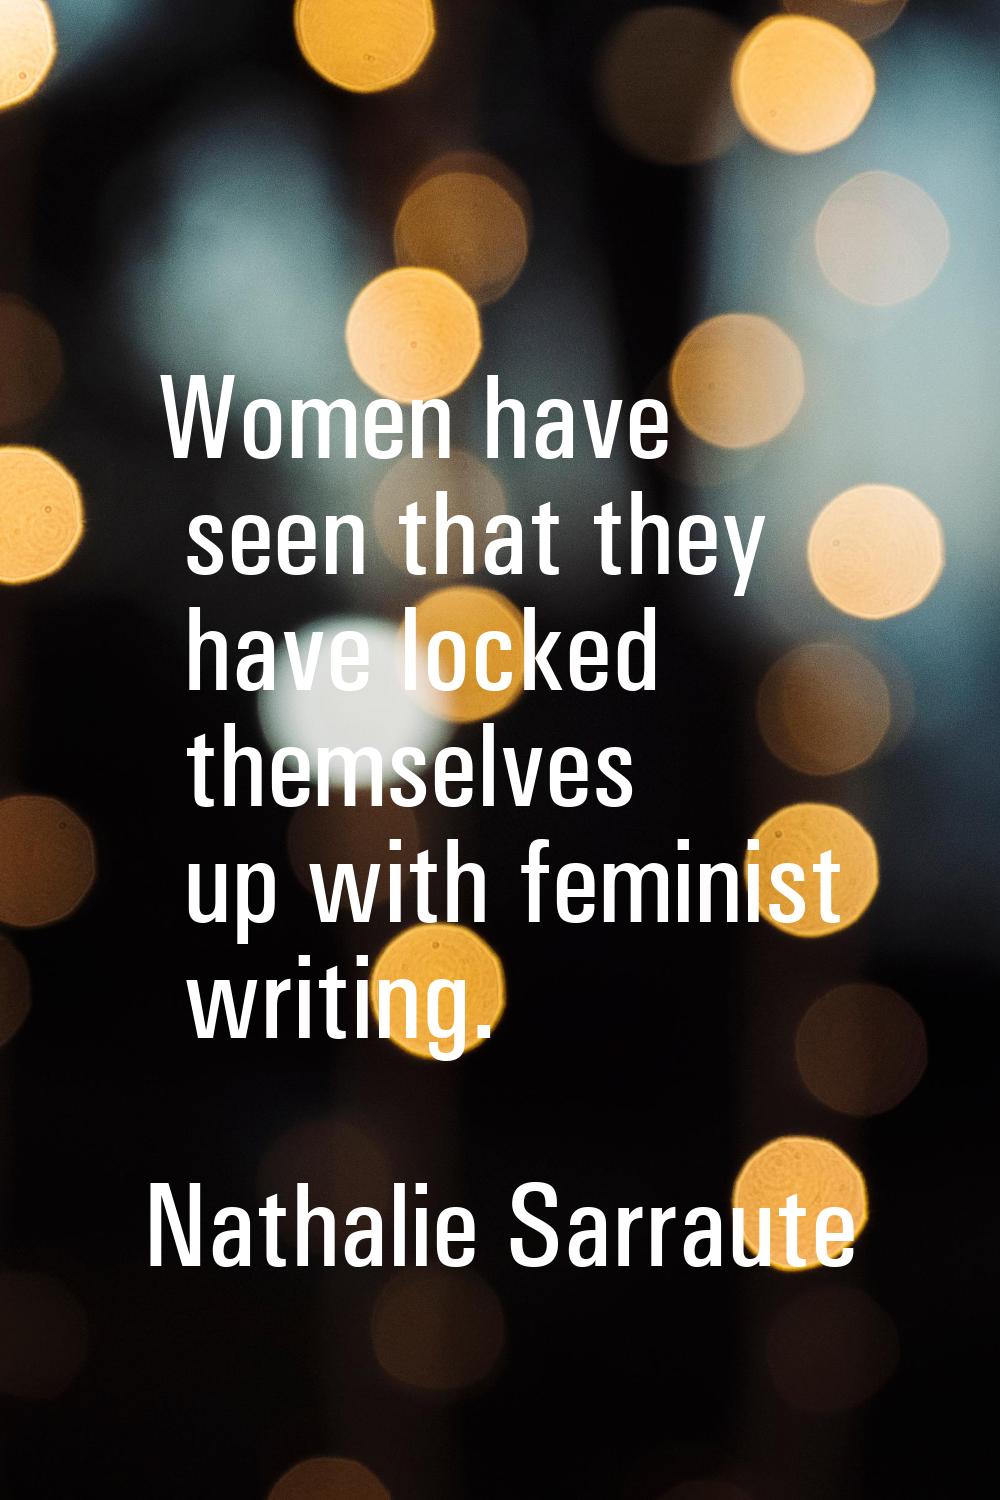 Women have seen that they have locked themselves up with feminist writing.